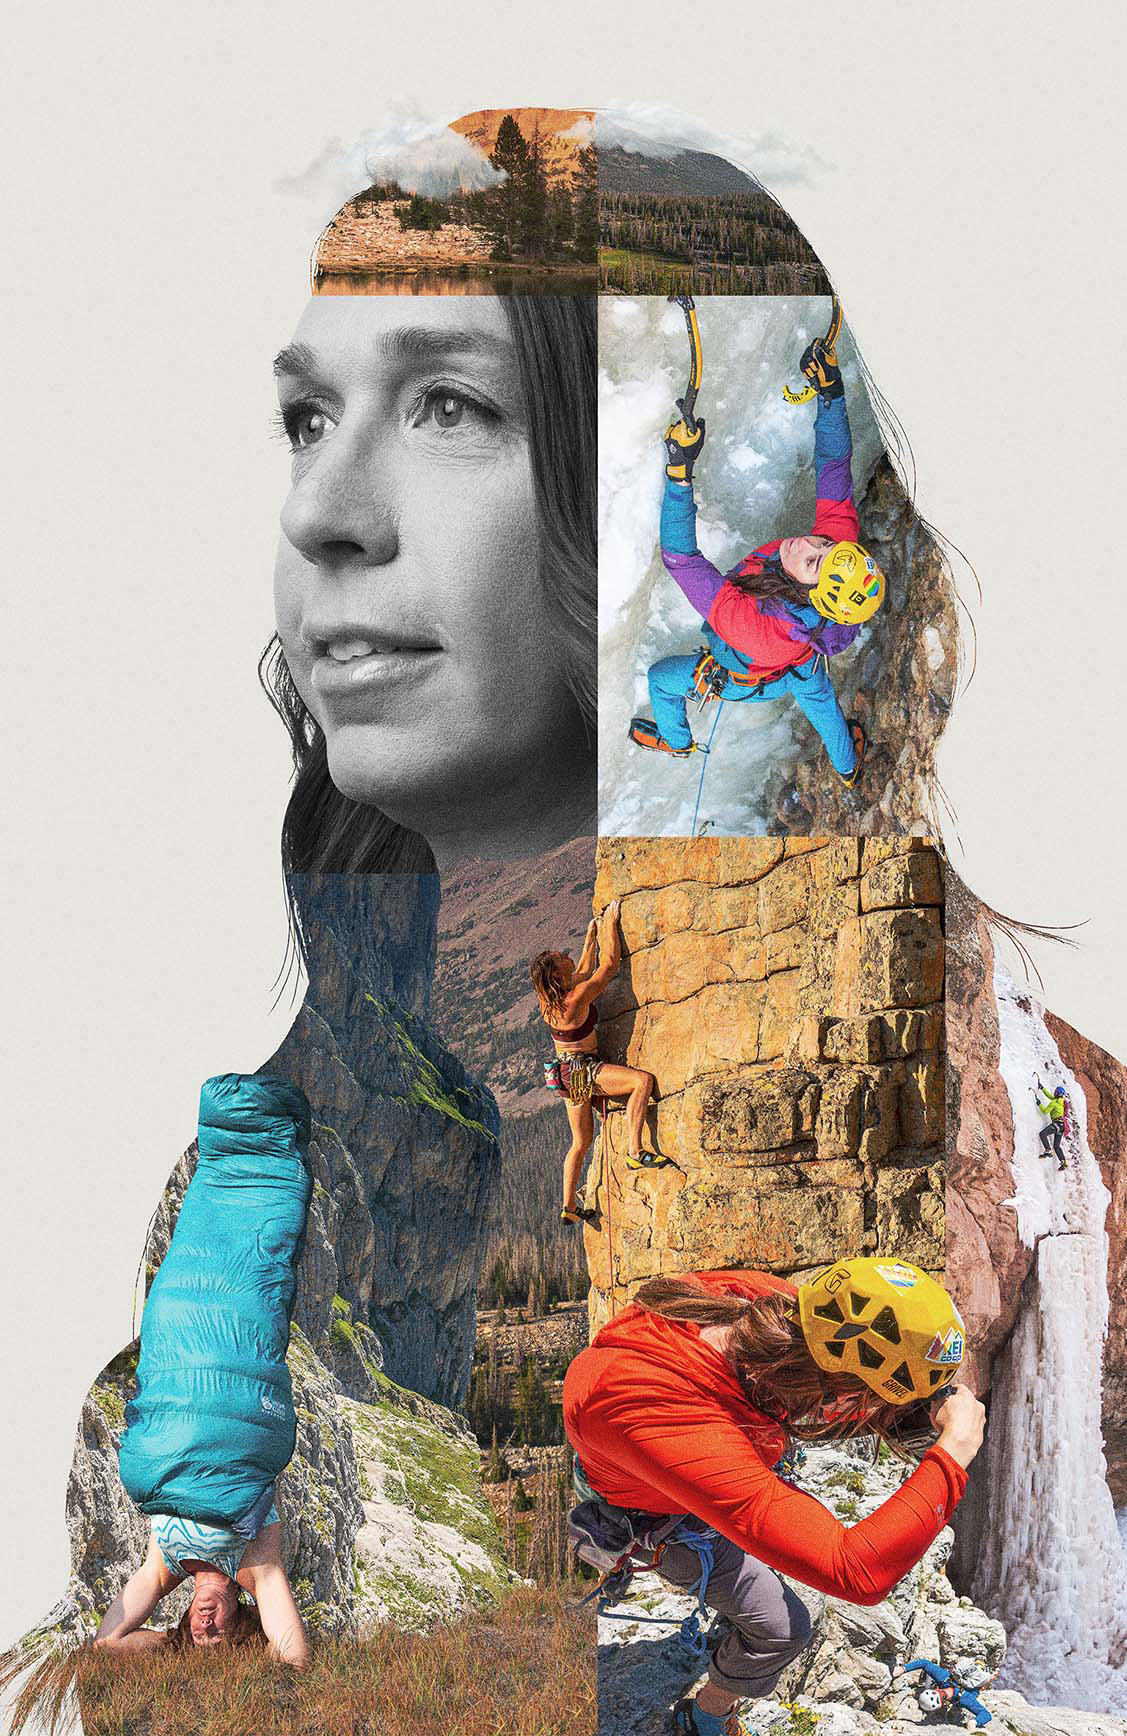 portrait of Nikki Smith with compilation of images of Nikki rock and ice climbing, doing a handstand and taking photos at a climb event